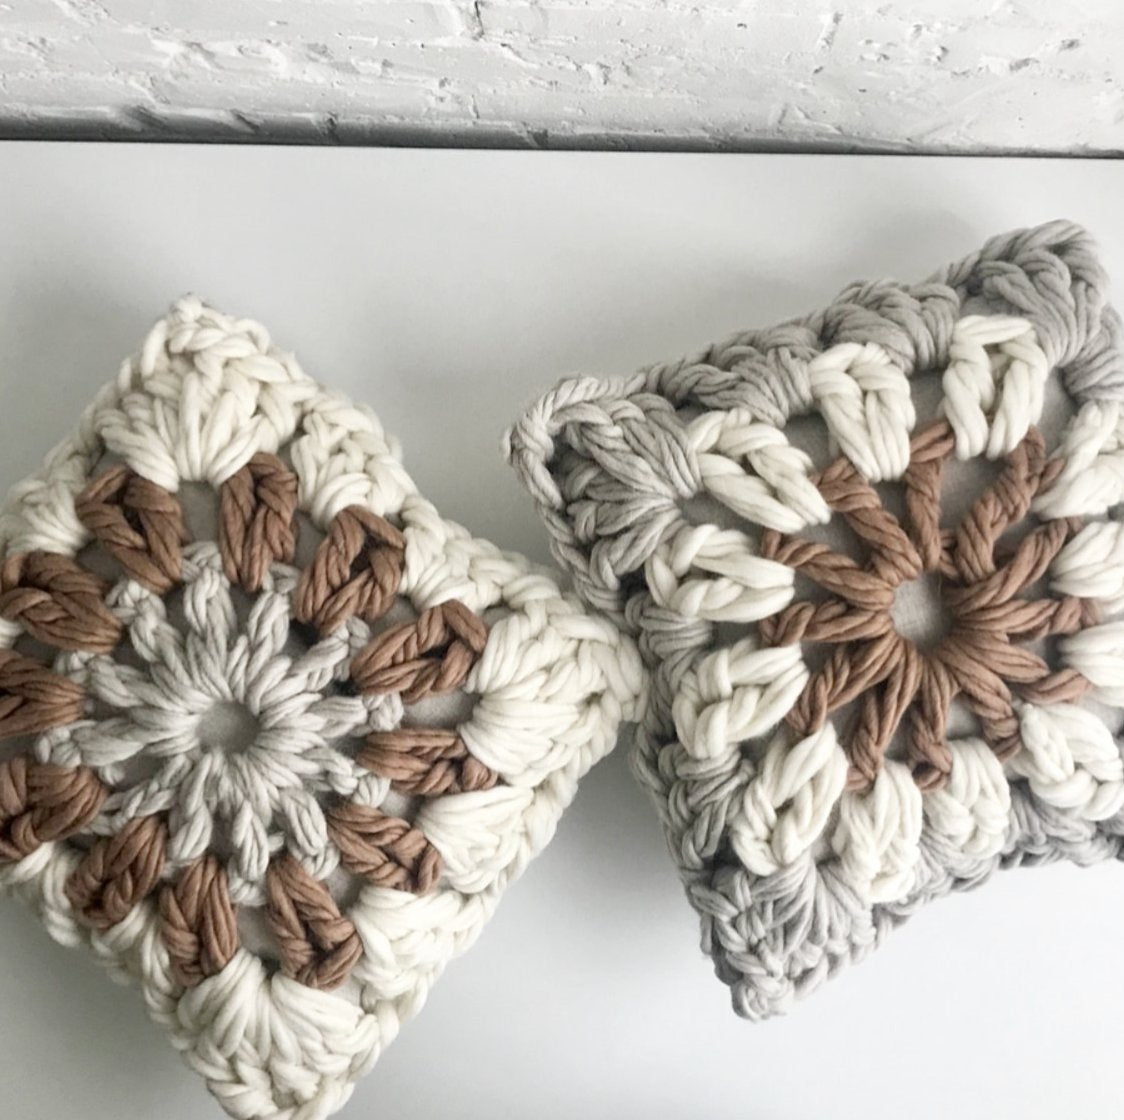 How to Crochet an Easy Granny Square Pillow